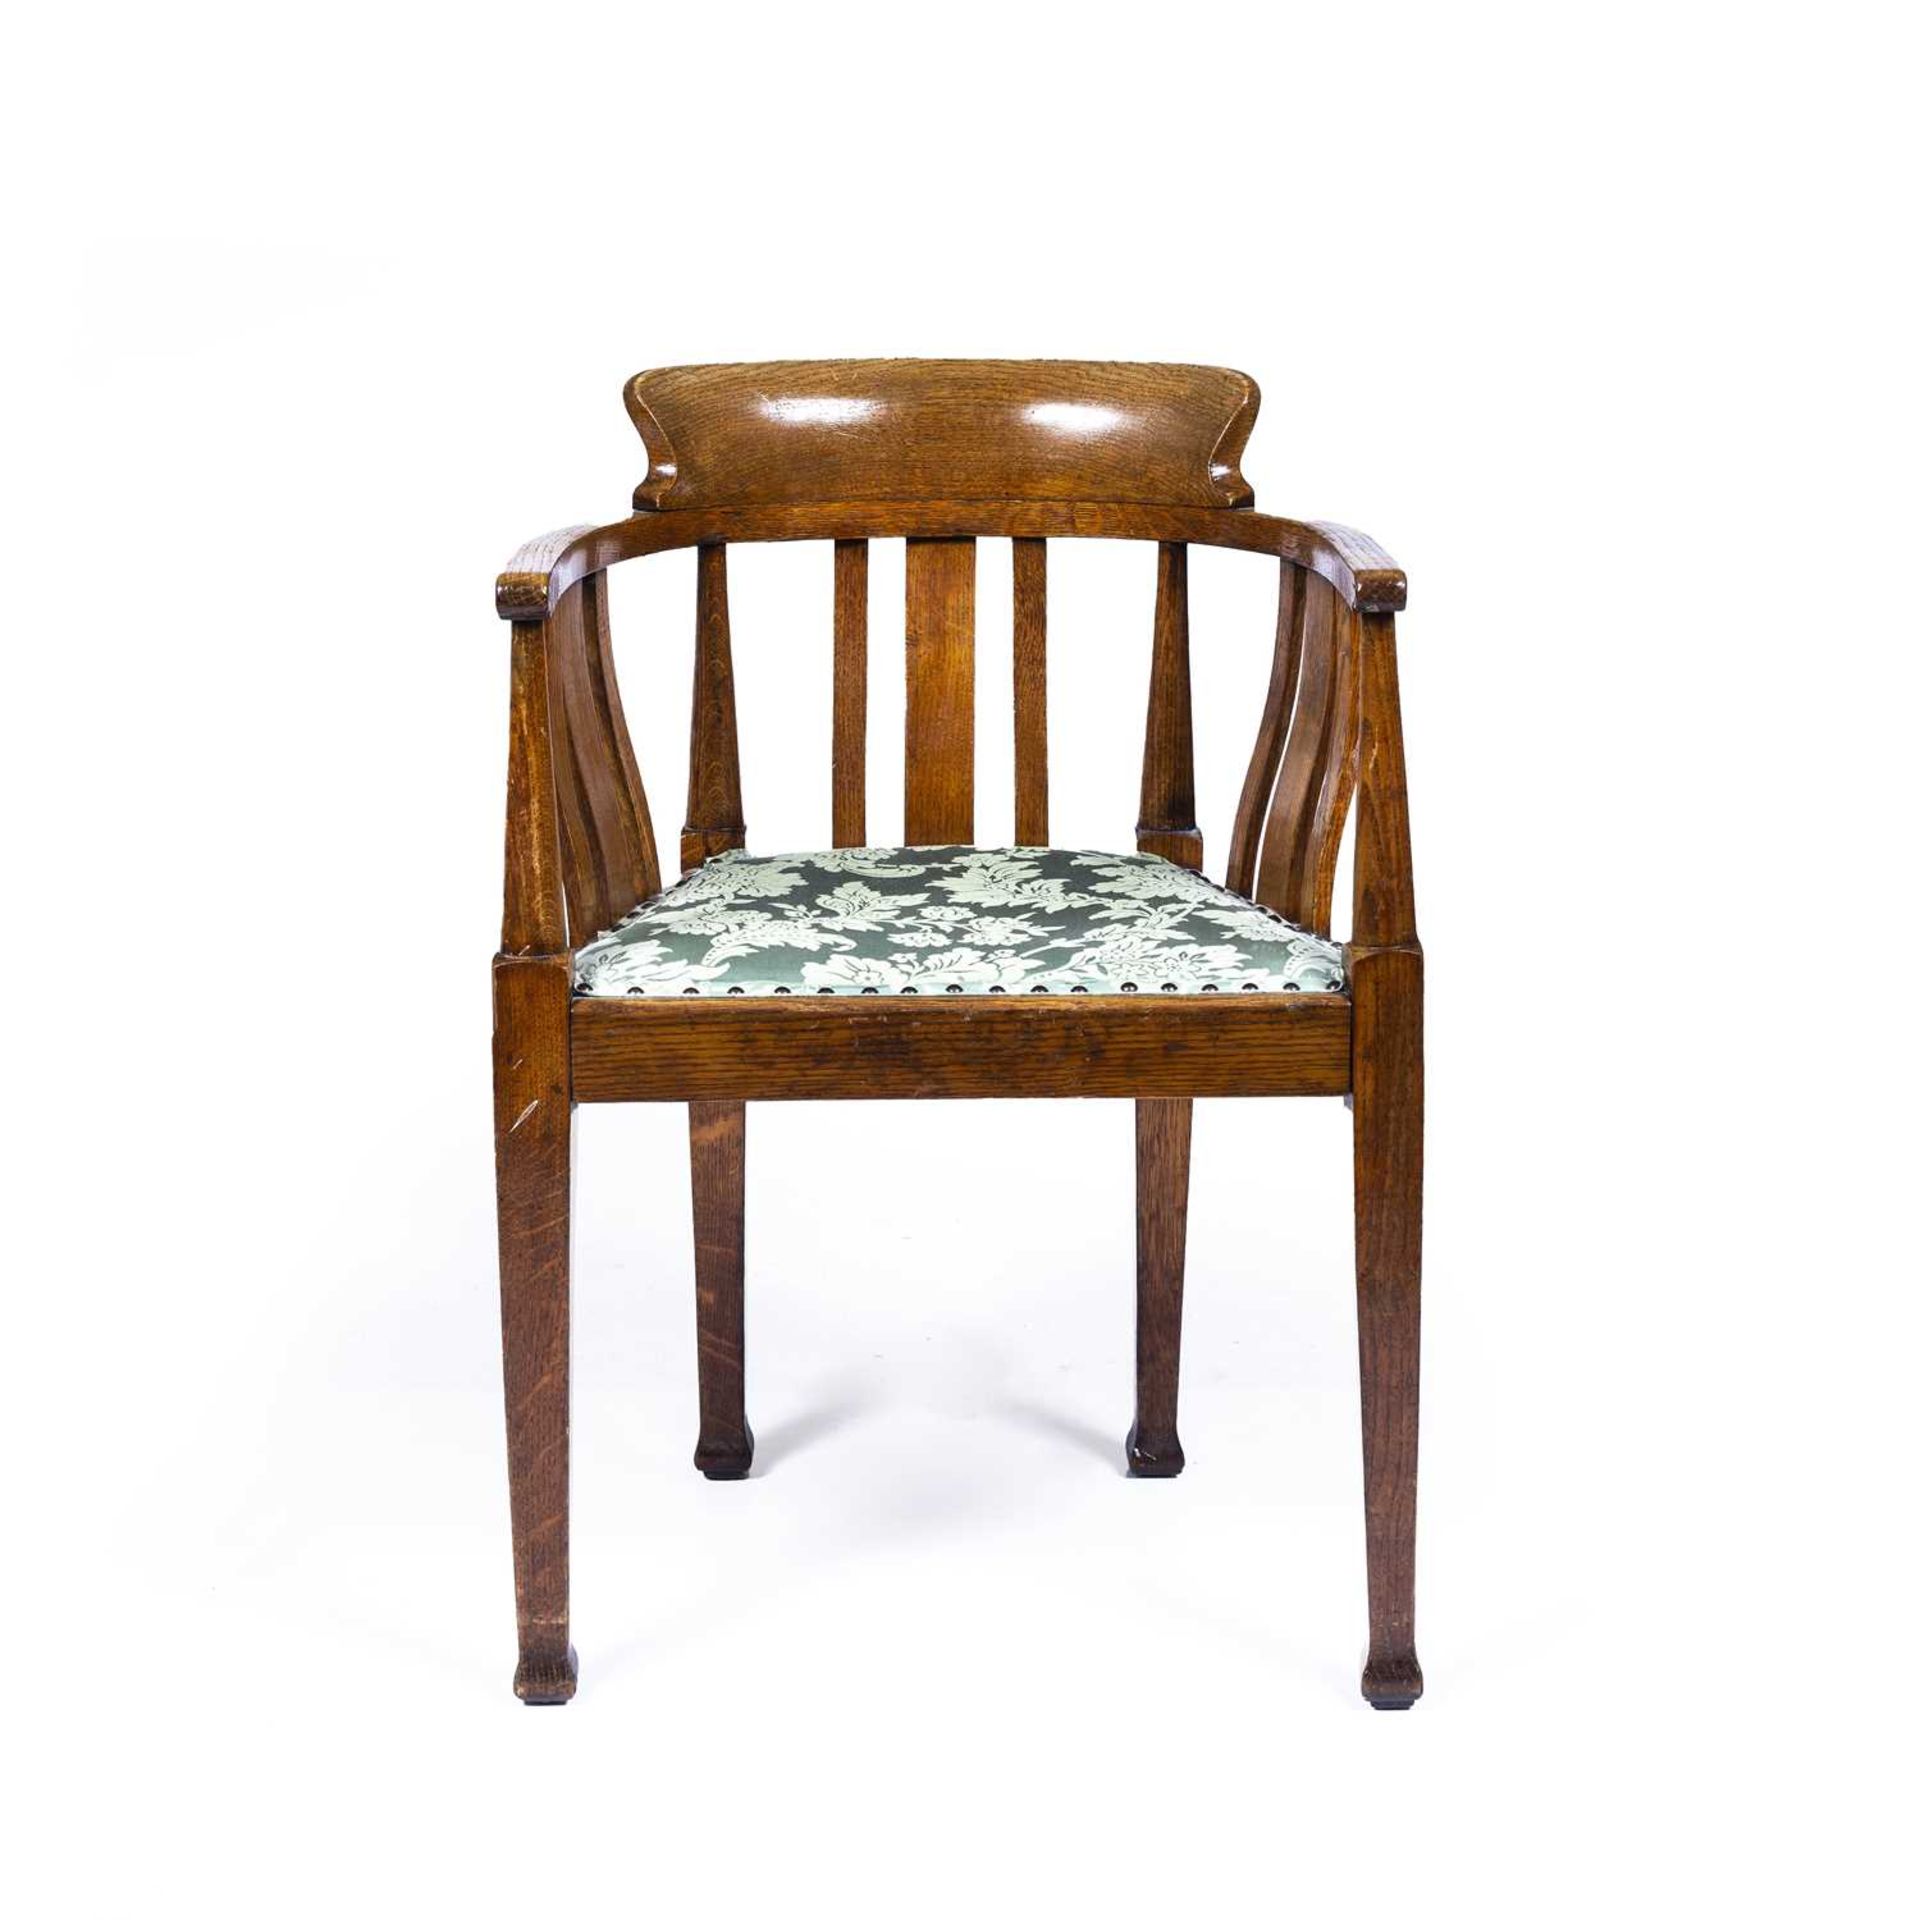 Attributed to Ambrose Heal (1872-1959) oak, armchair with green floral upholstered seat, unmarked,